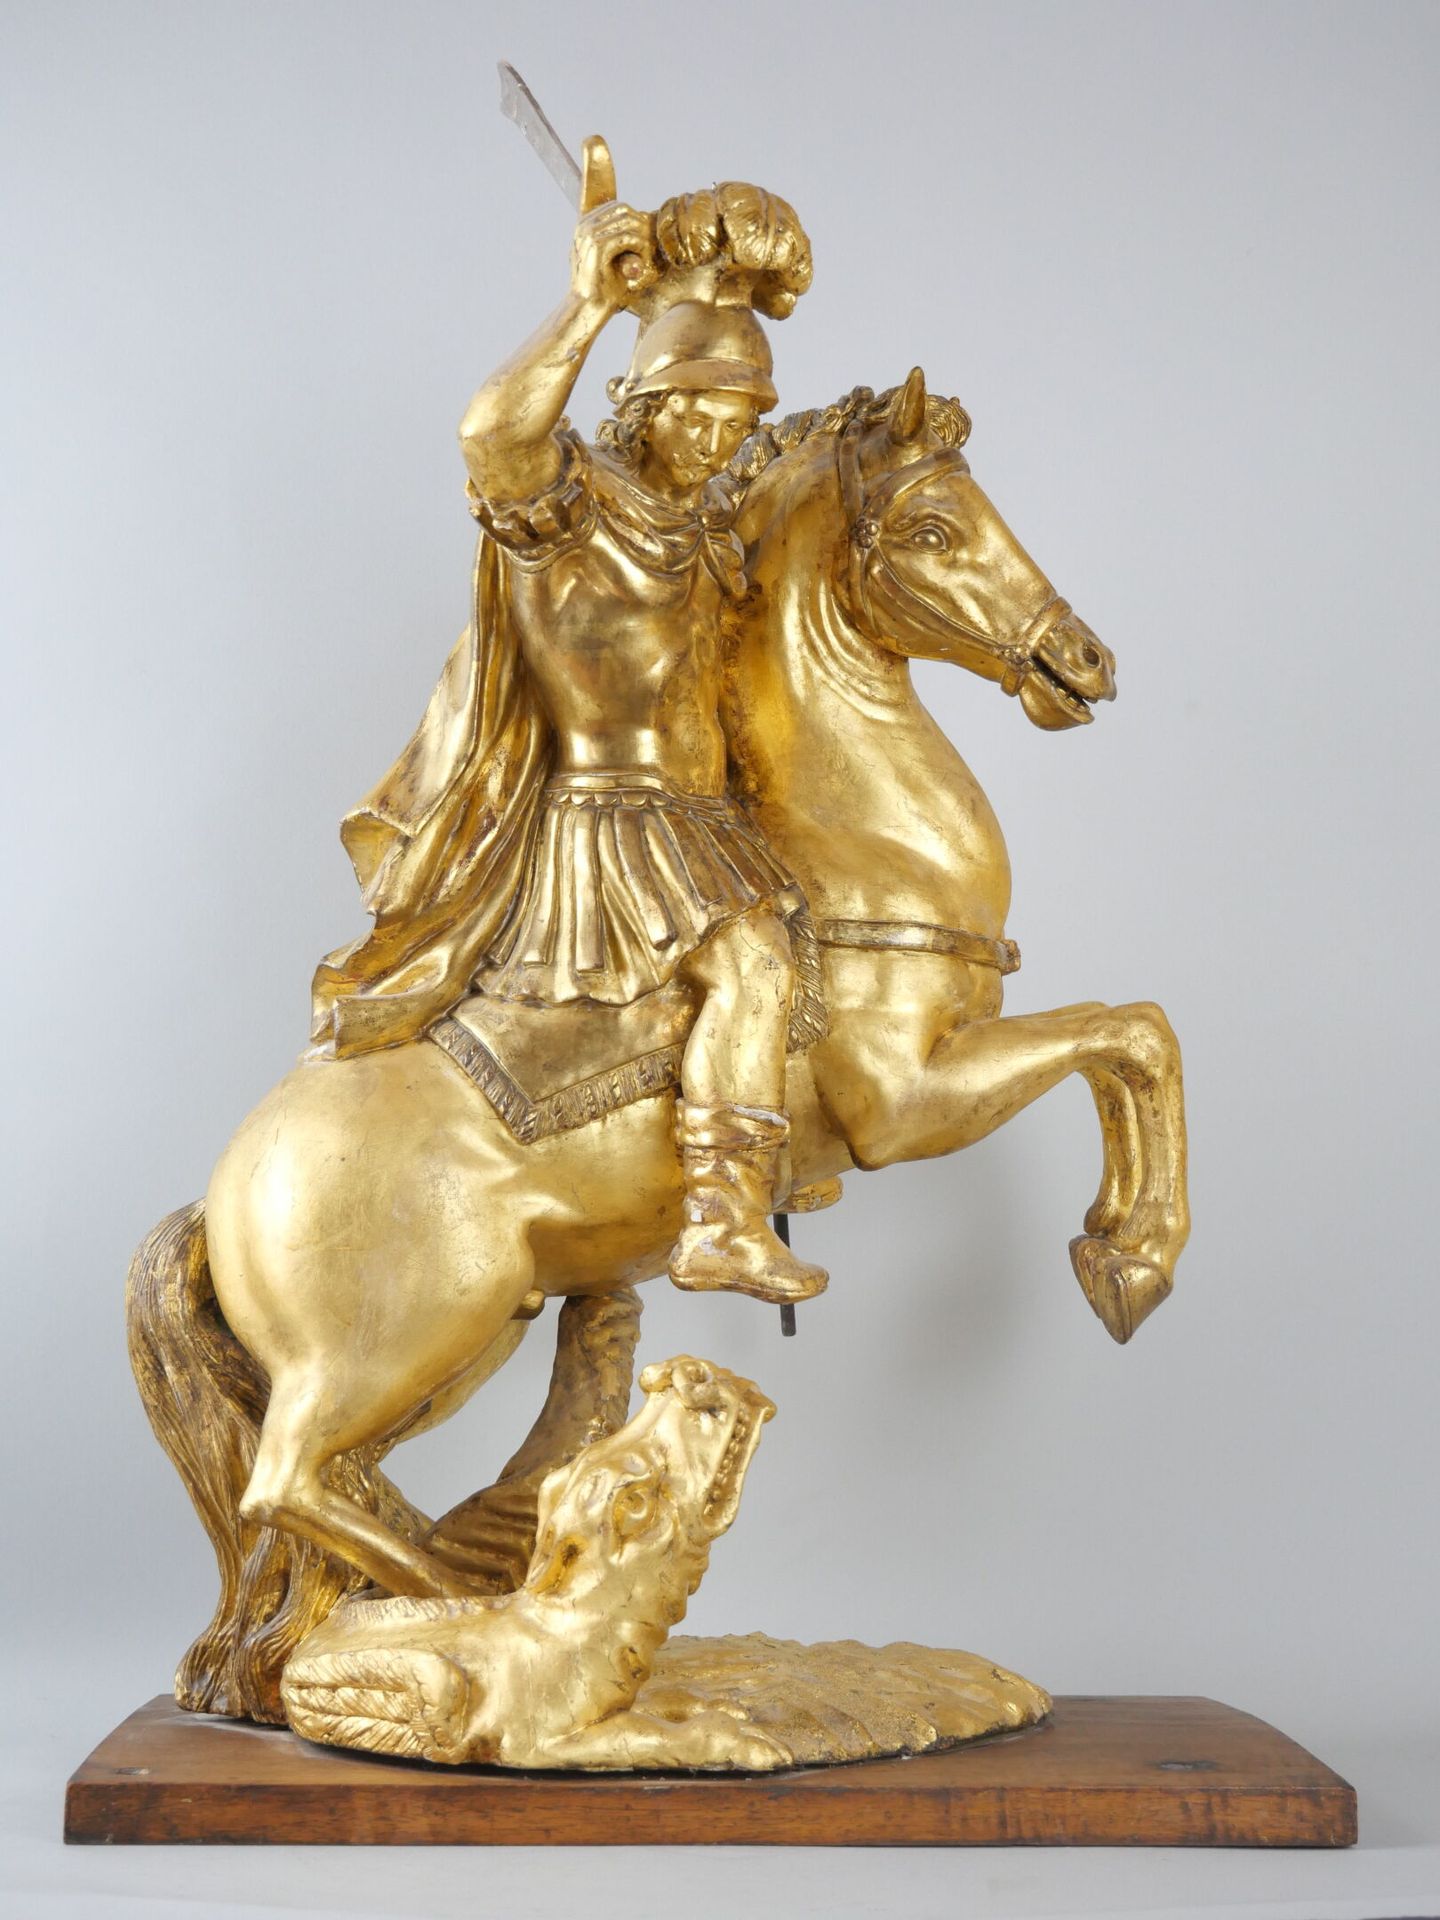 Null Sculpture in gilded wood, representing Saint George slaying the dragon.

Pr&hellip;